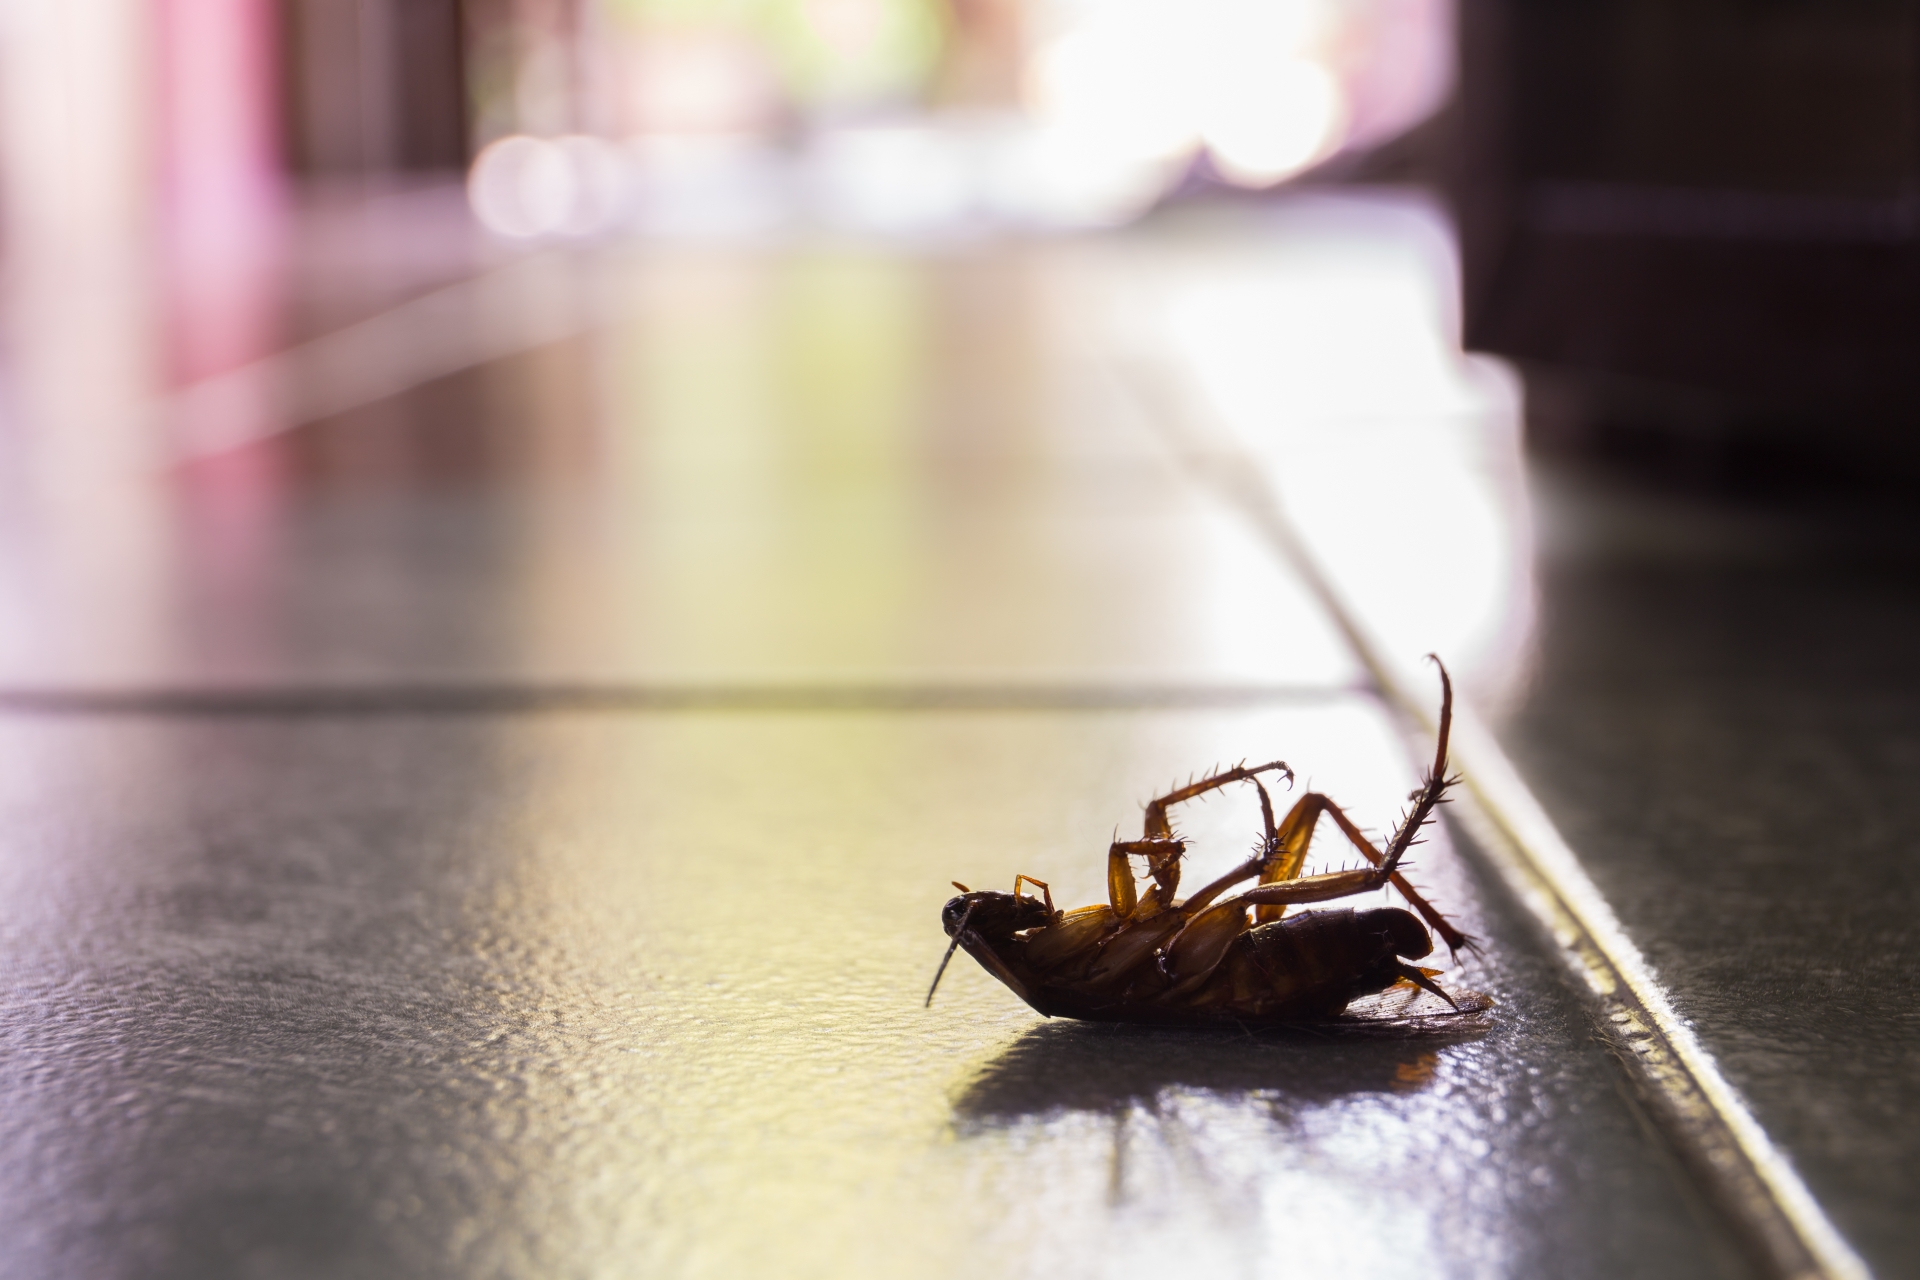 Cockroach Control, Pest Control in Kensington, W8. Call Now 020 8166 9746